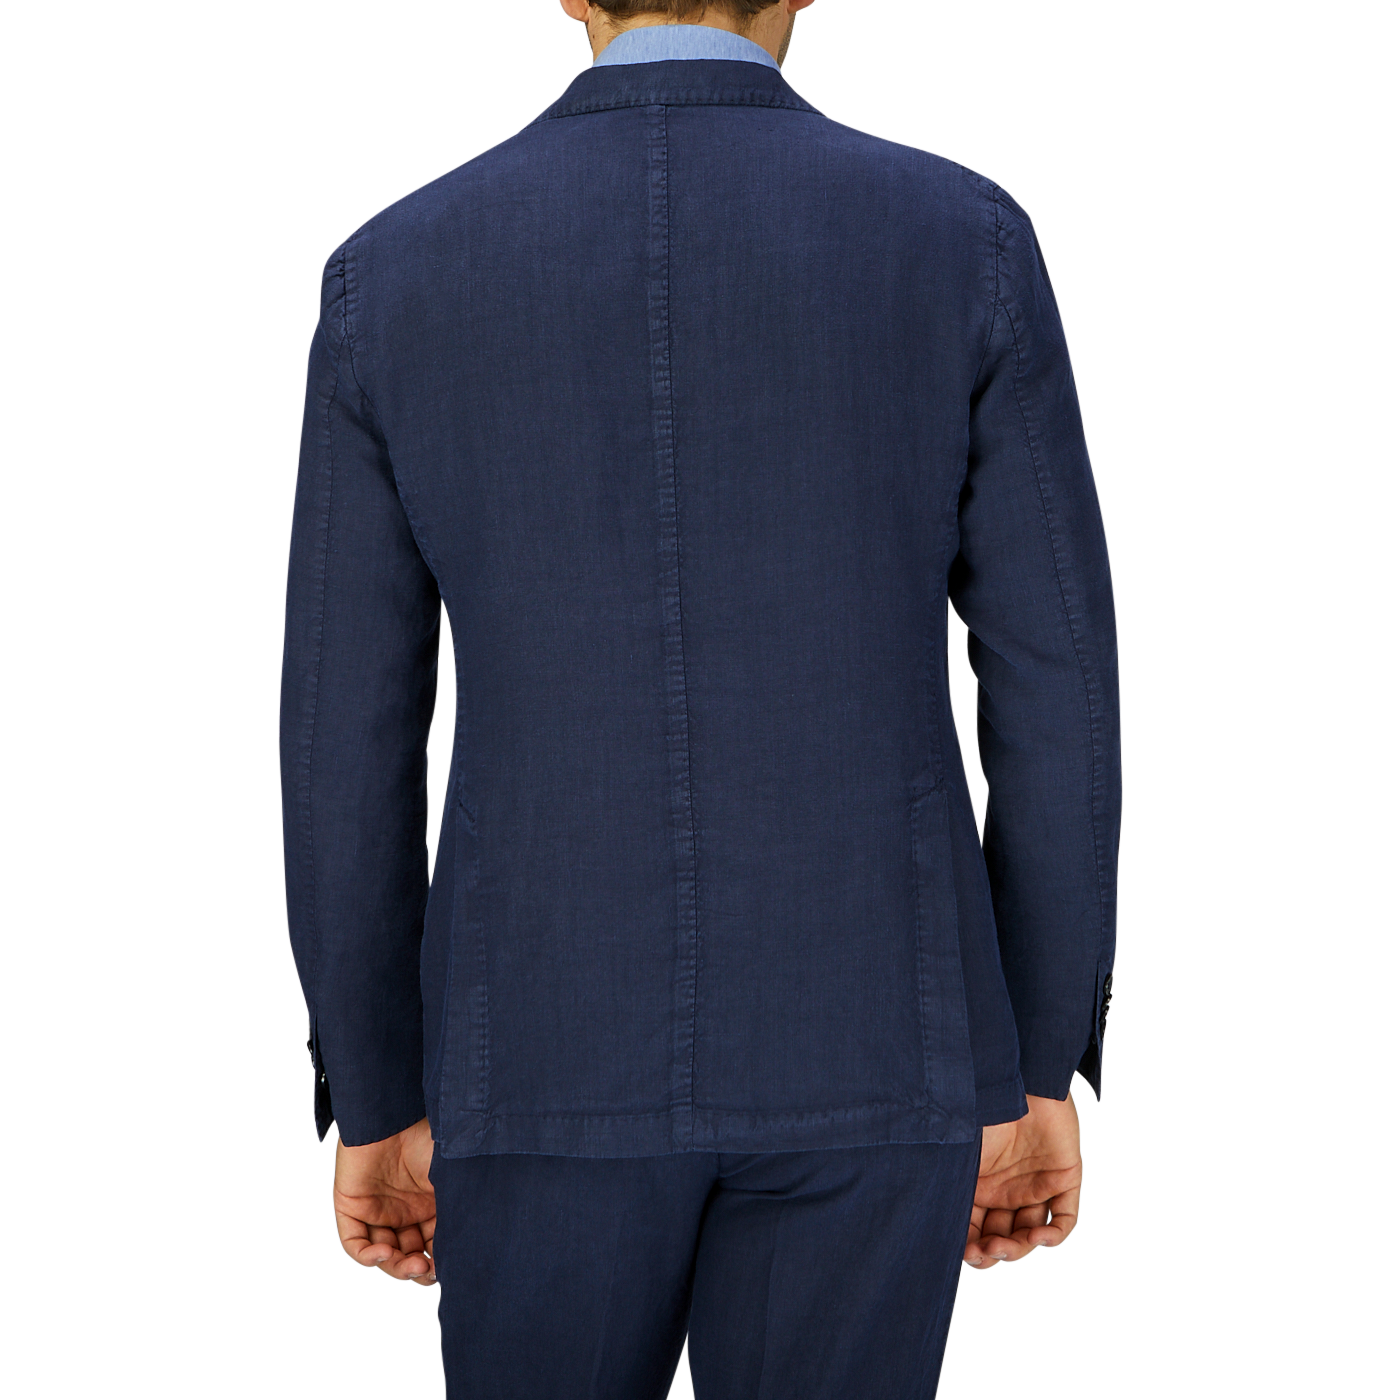 A man viewed from the back, wearing a dark navy blue, unbuttoned L.B.M. 1911 washed linen suit jacket and matching trousers.